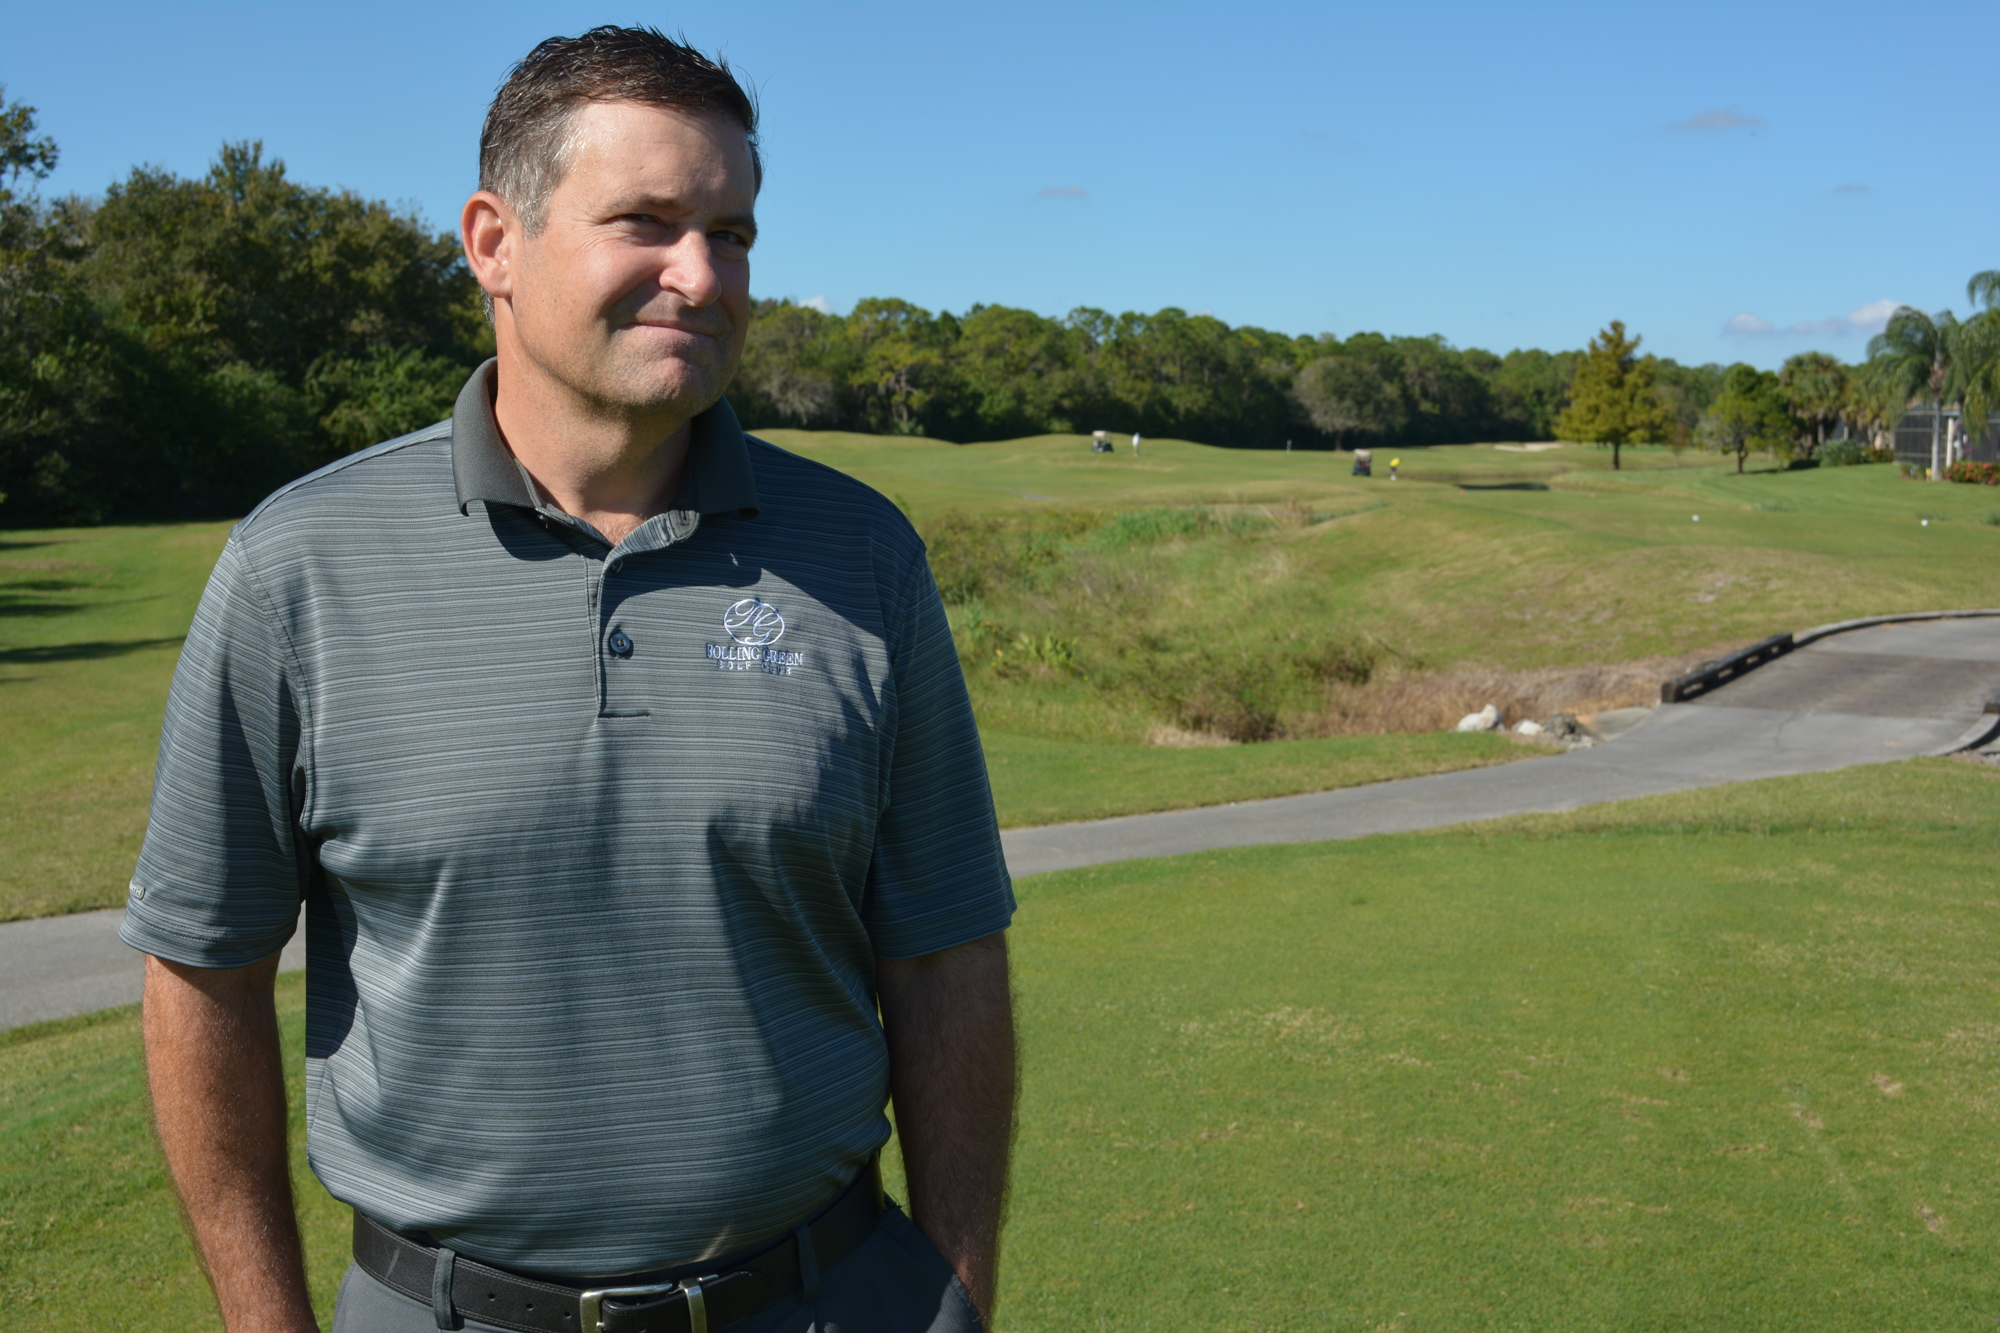 New owner Jon Whittemore talks about bringing Legacy Golf Club back to pristine condition.